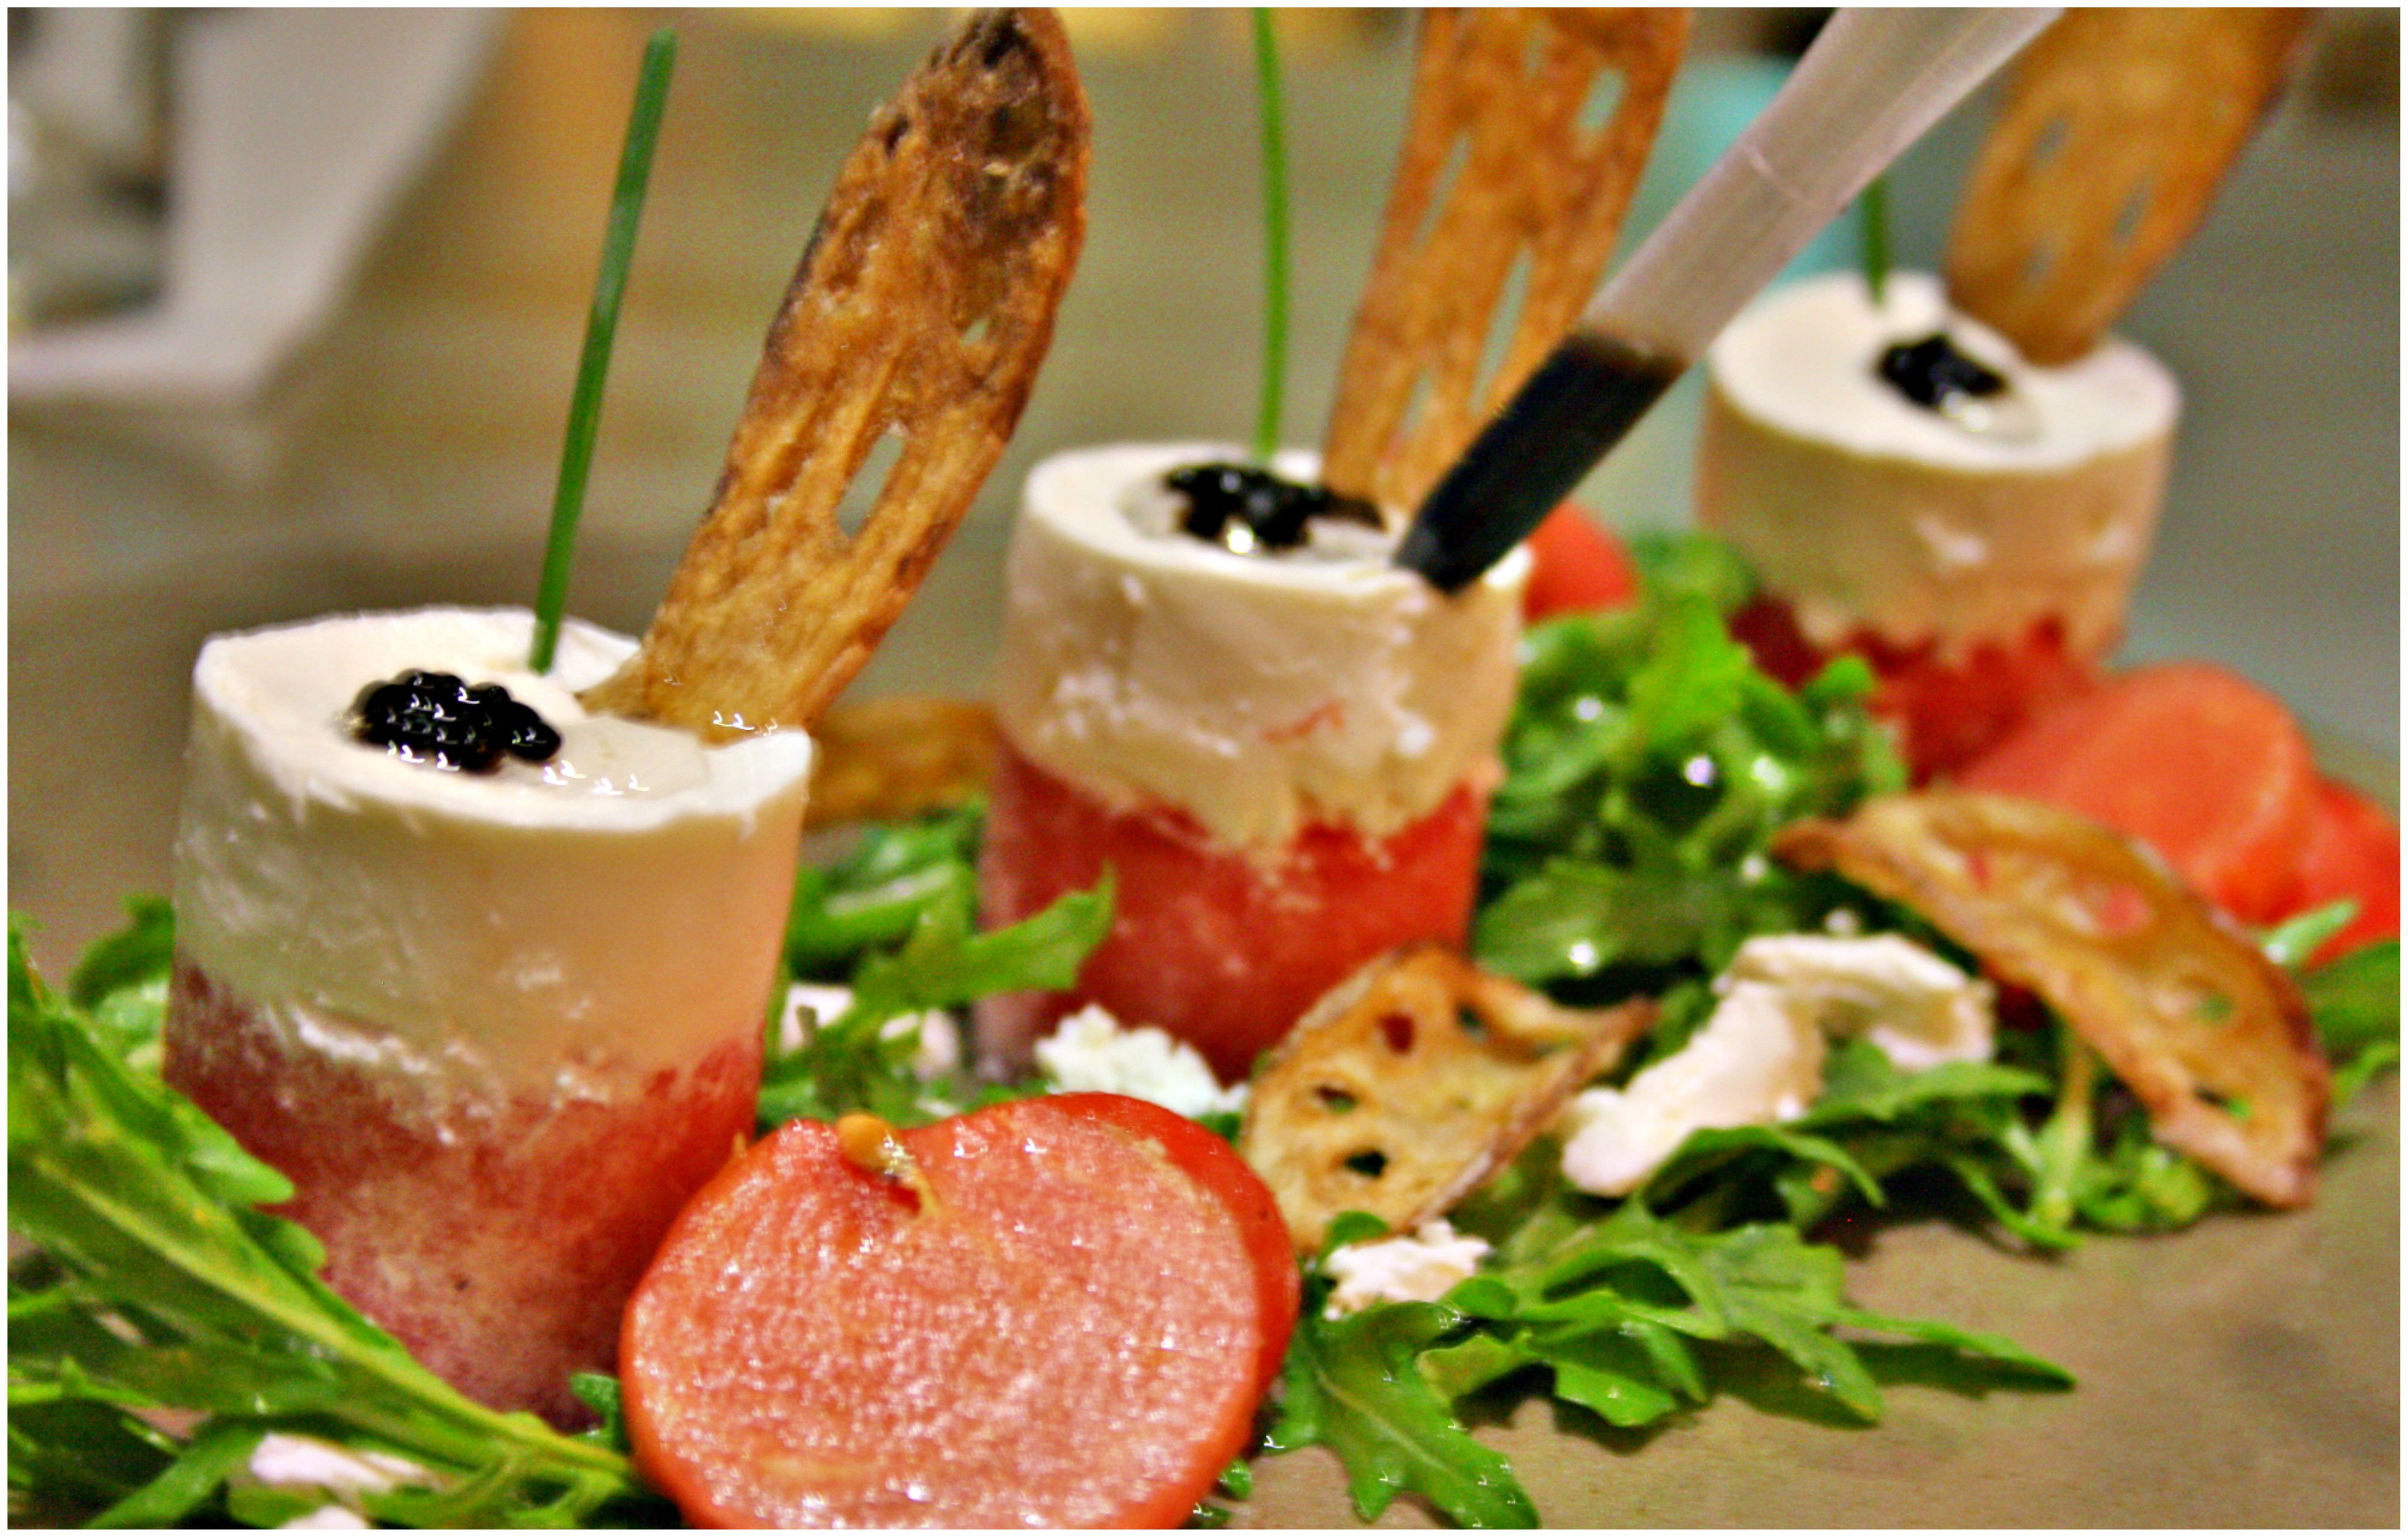 Watermelon and Feta Cheese Salad with Balsamic Dropper and Lotus Stem Chips